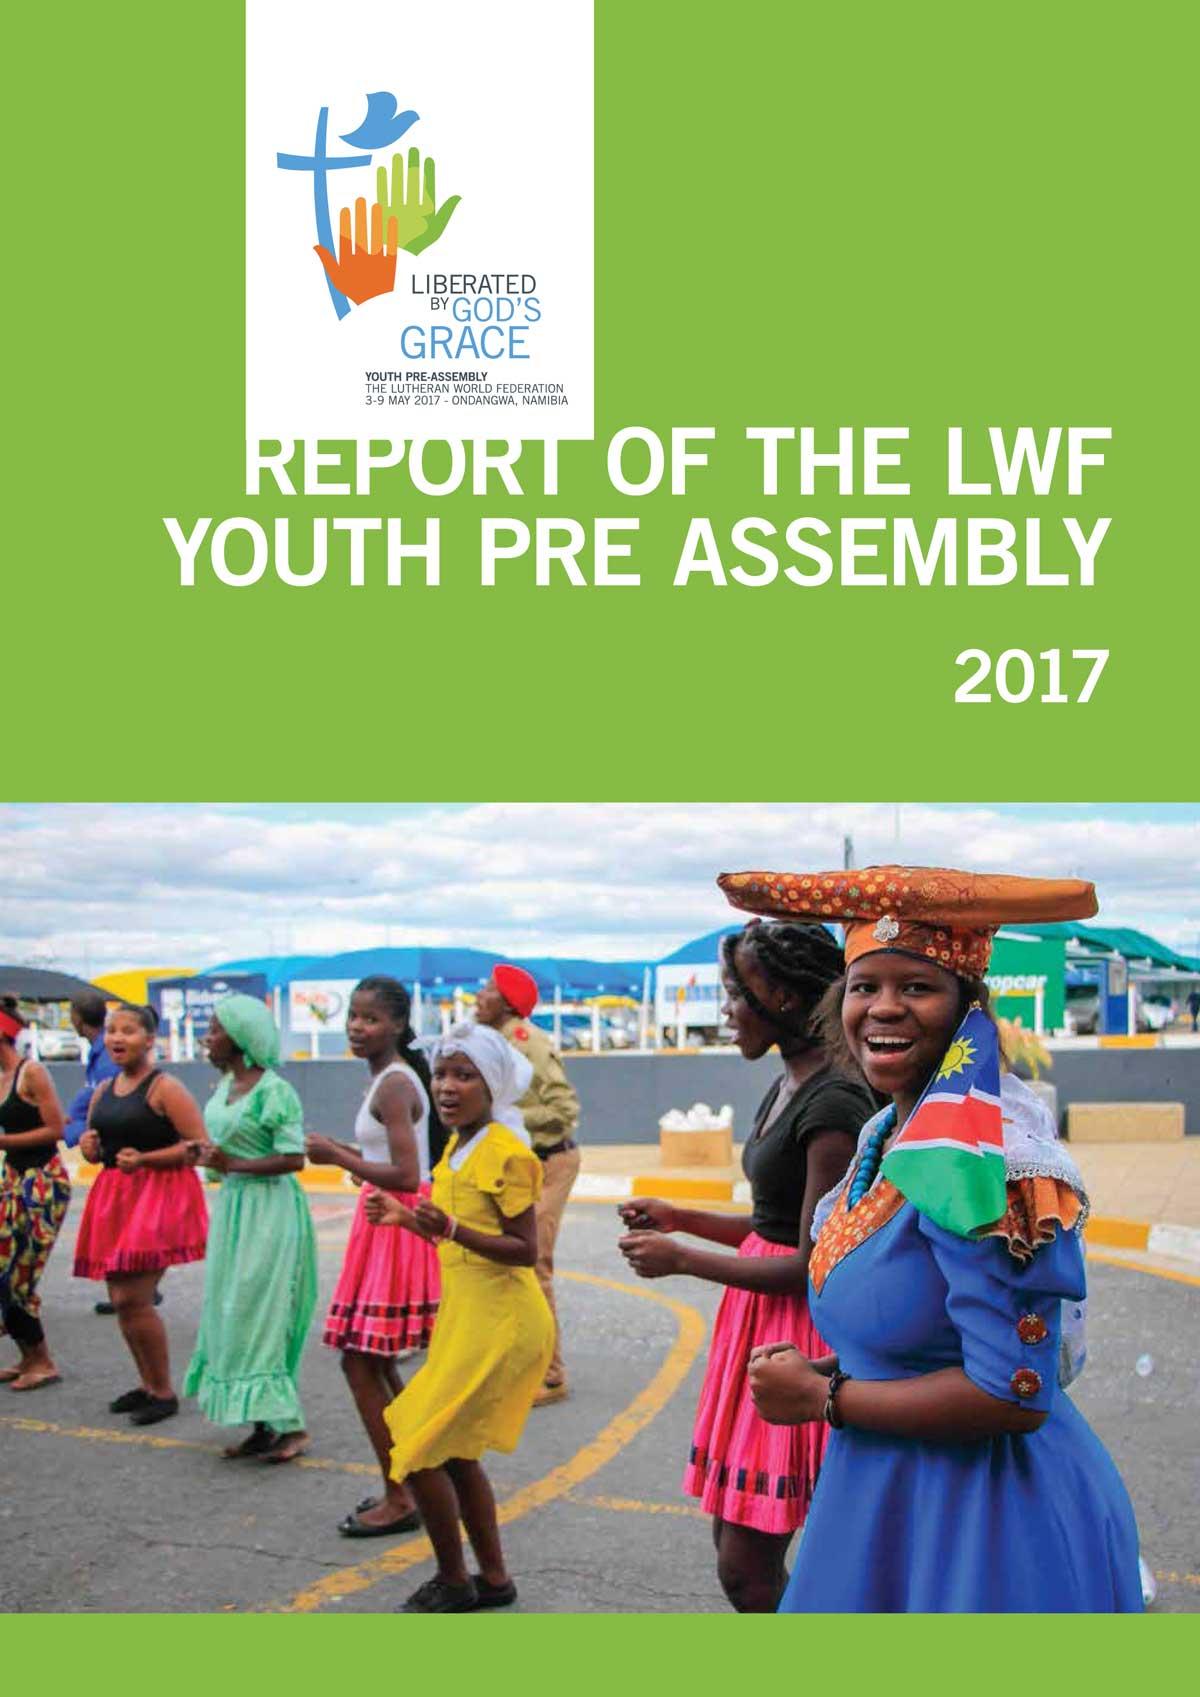 Report of the LWF Youth Pre Assembly 2017